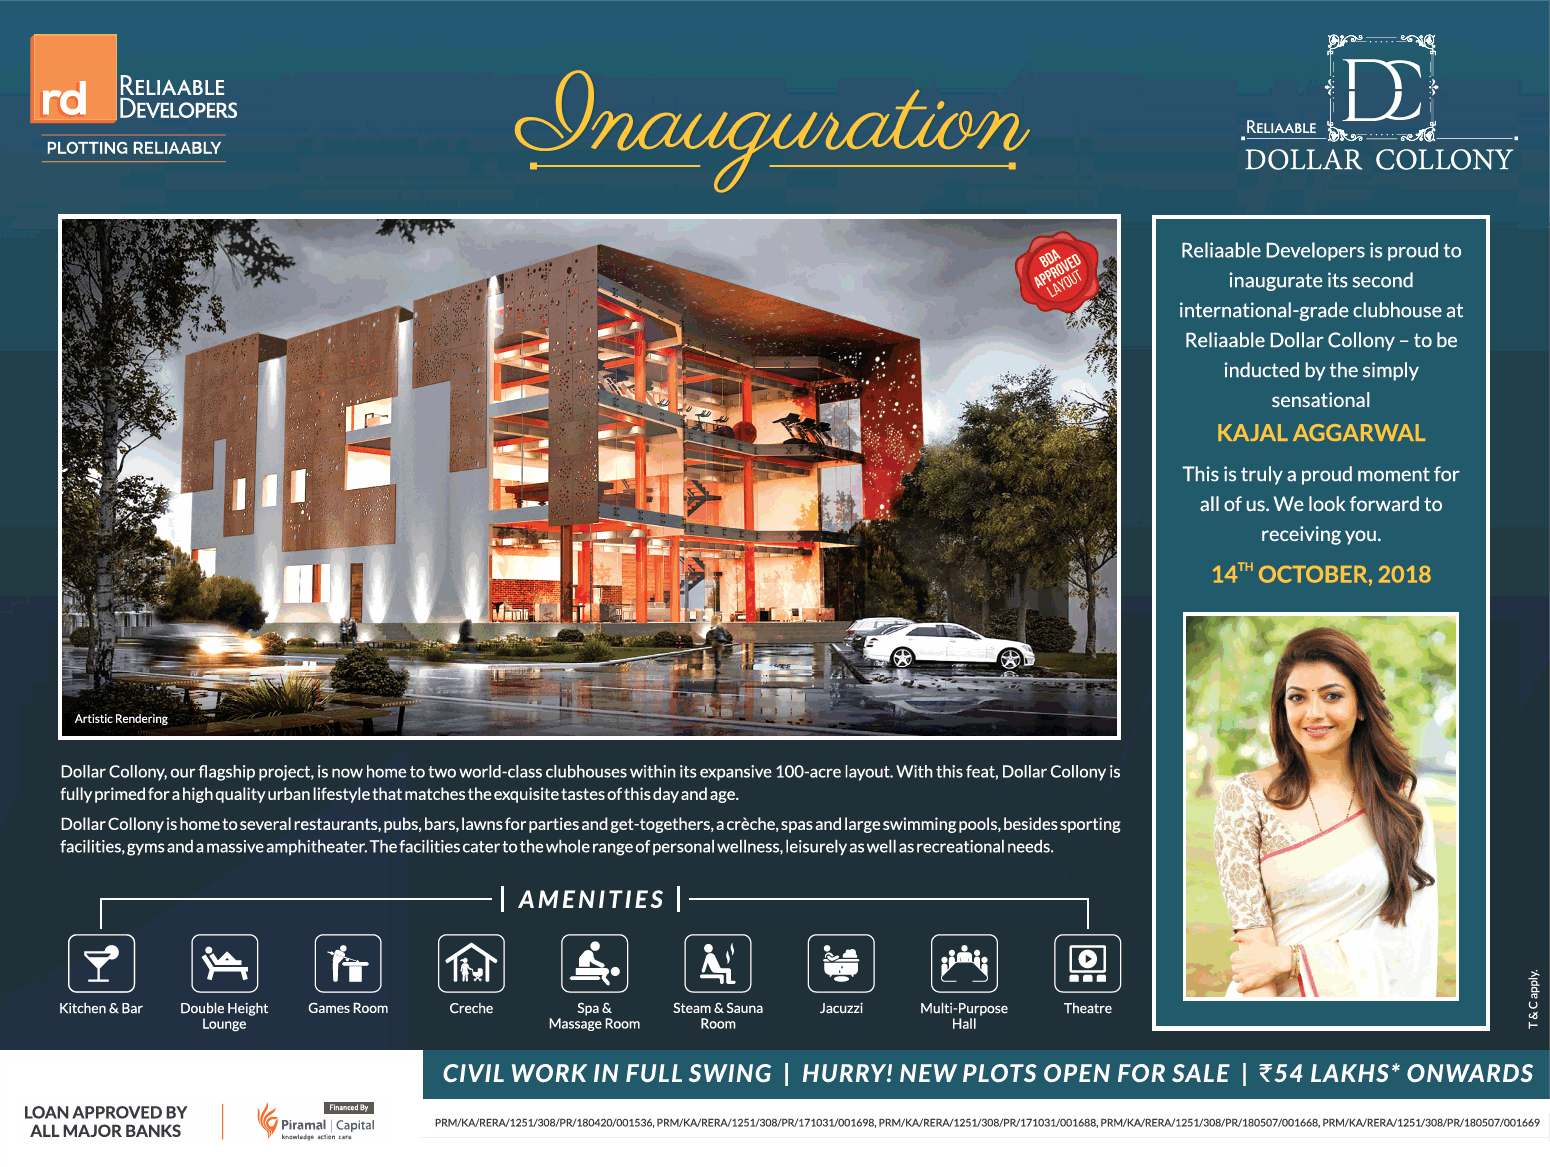 Presenting 2nd international grade clubhouse at Reliaable Dollars Collony in Bangalore Update